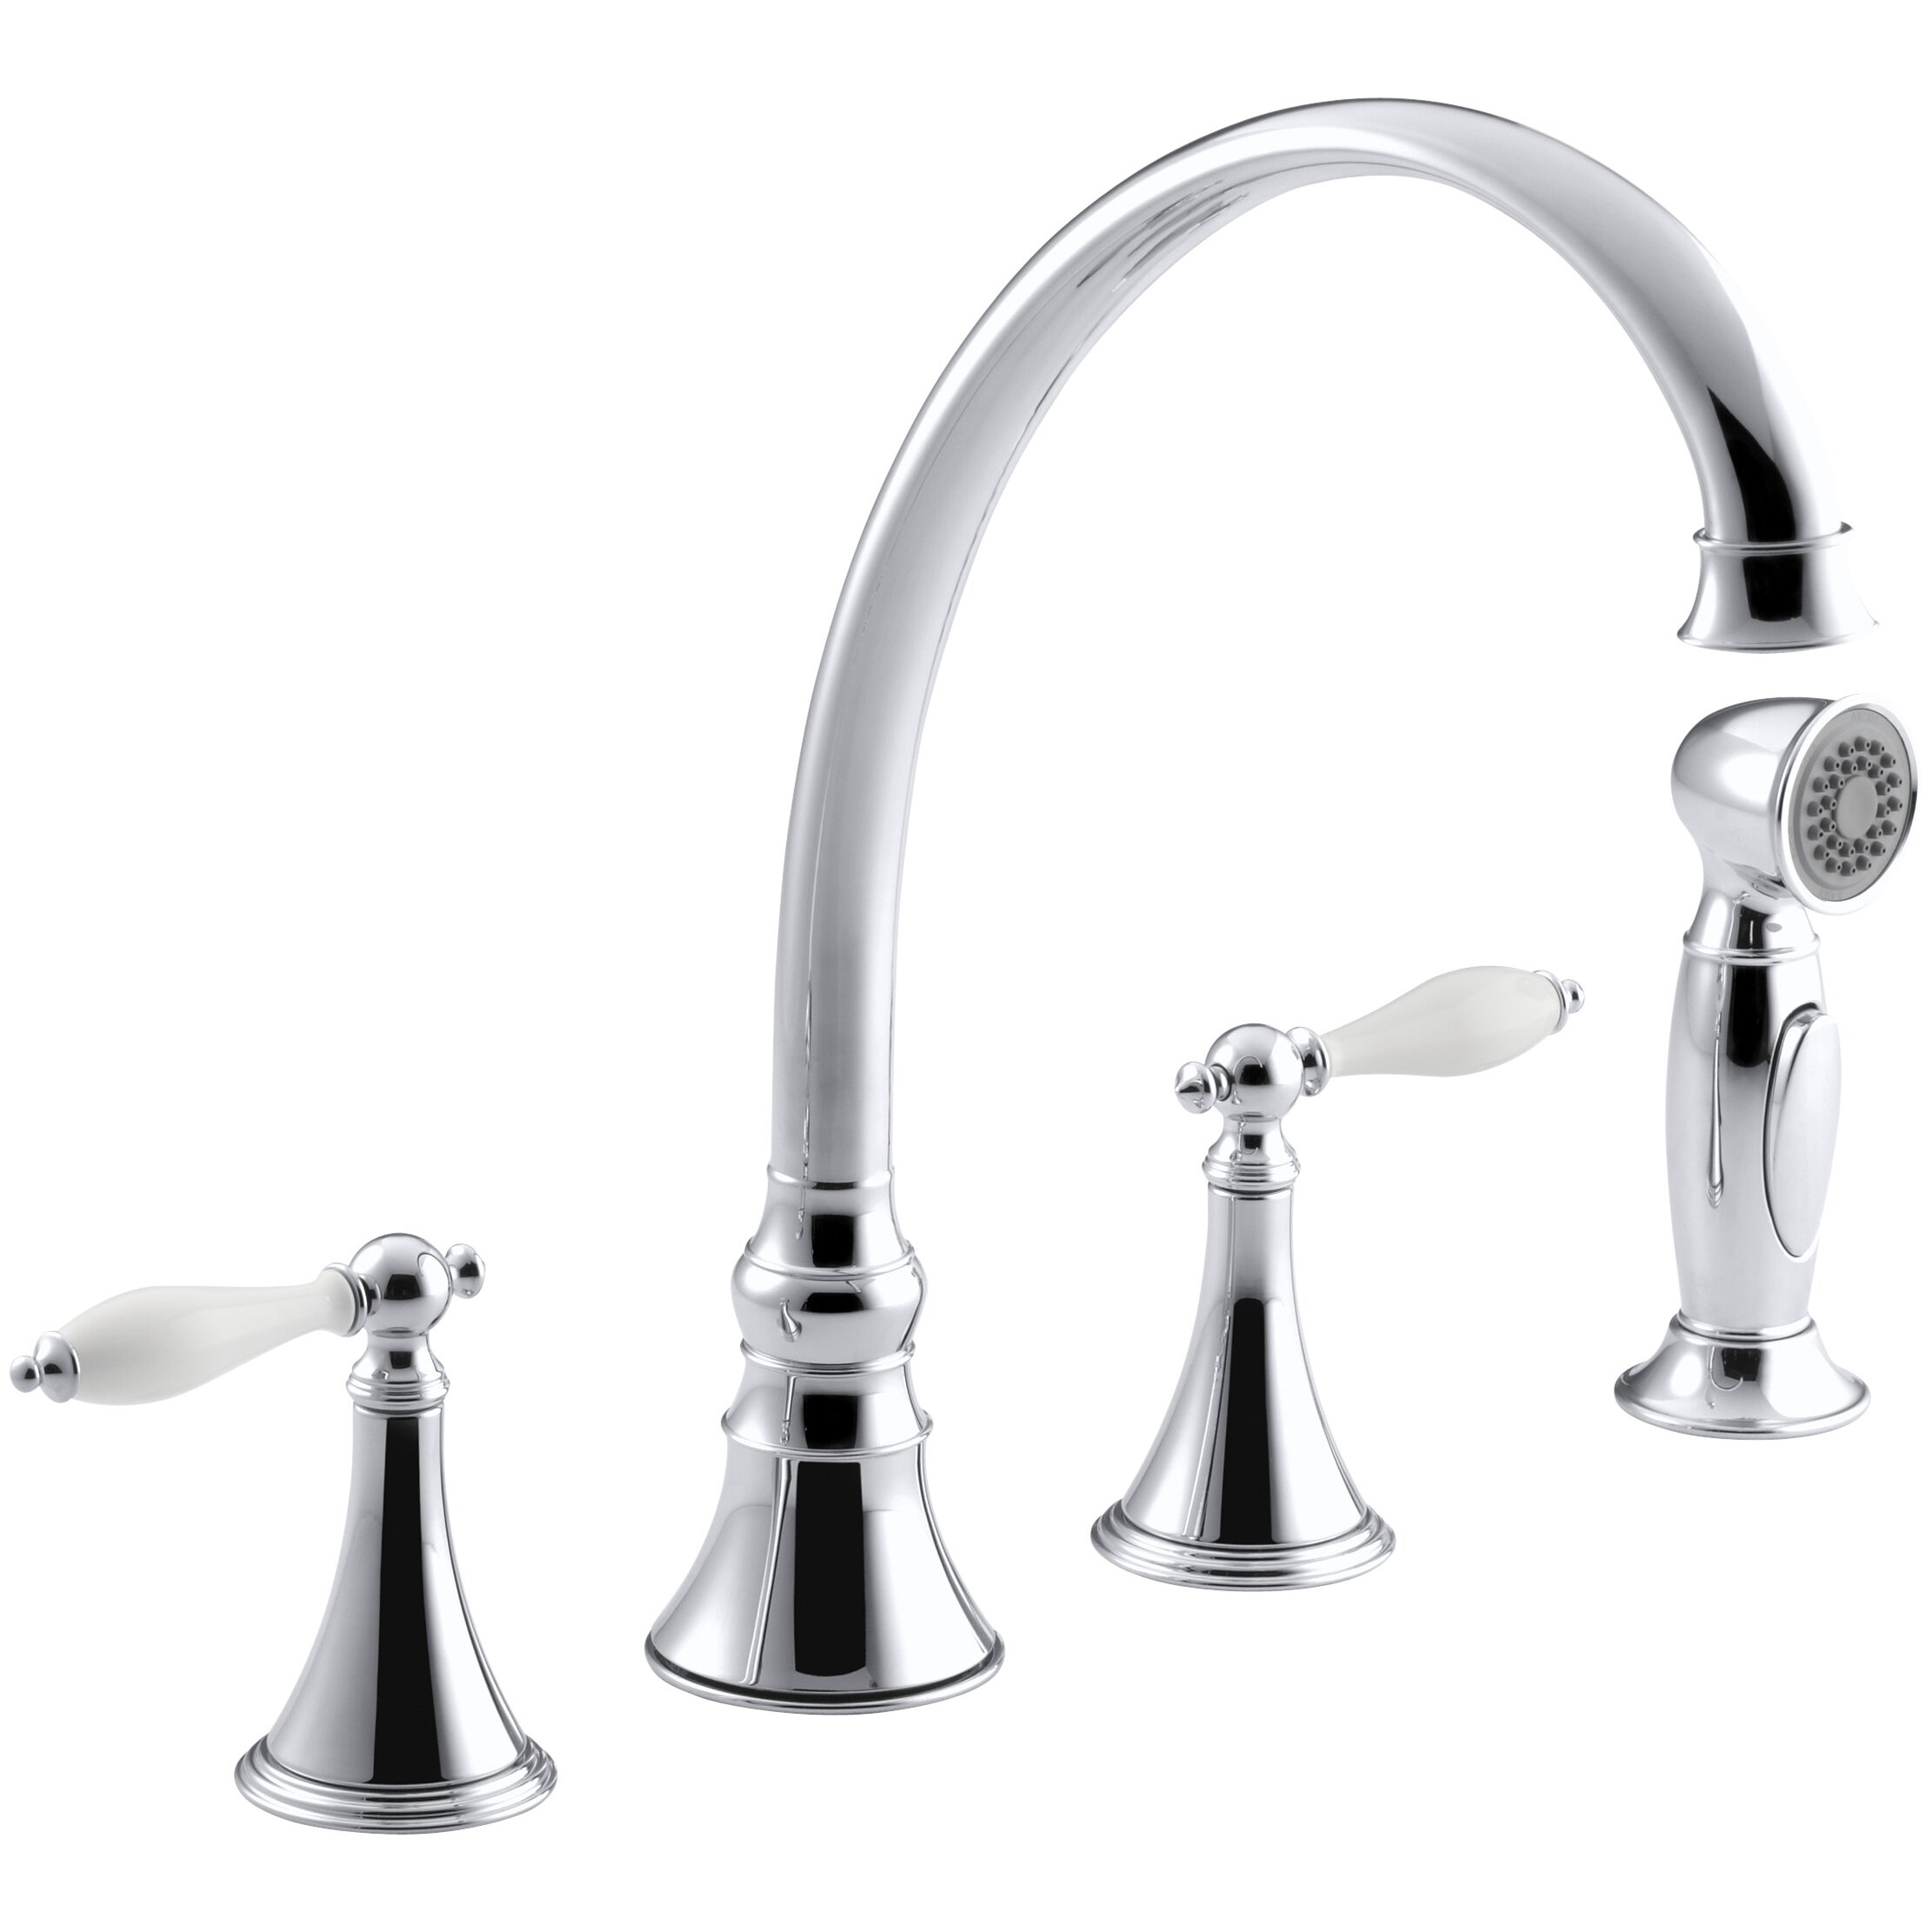 Kohler Finial Traditional 4 Hole Kitchen Sink Faucet With 9 3 16 Spout Matching Finish Sidespray K 377 4P 